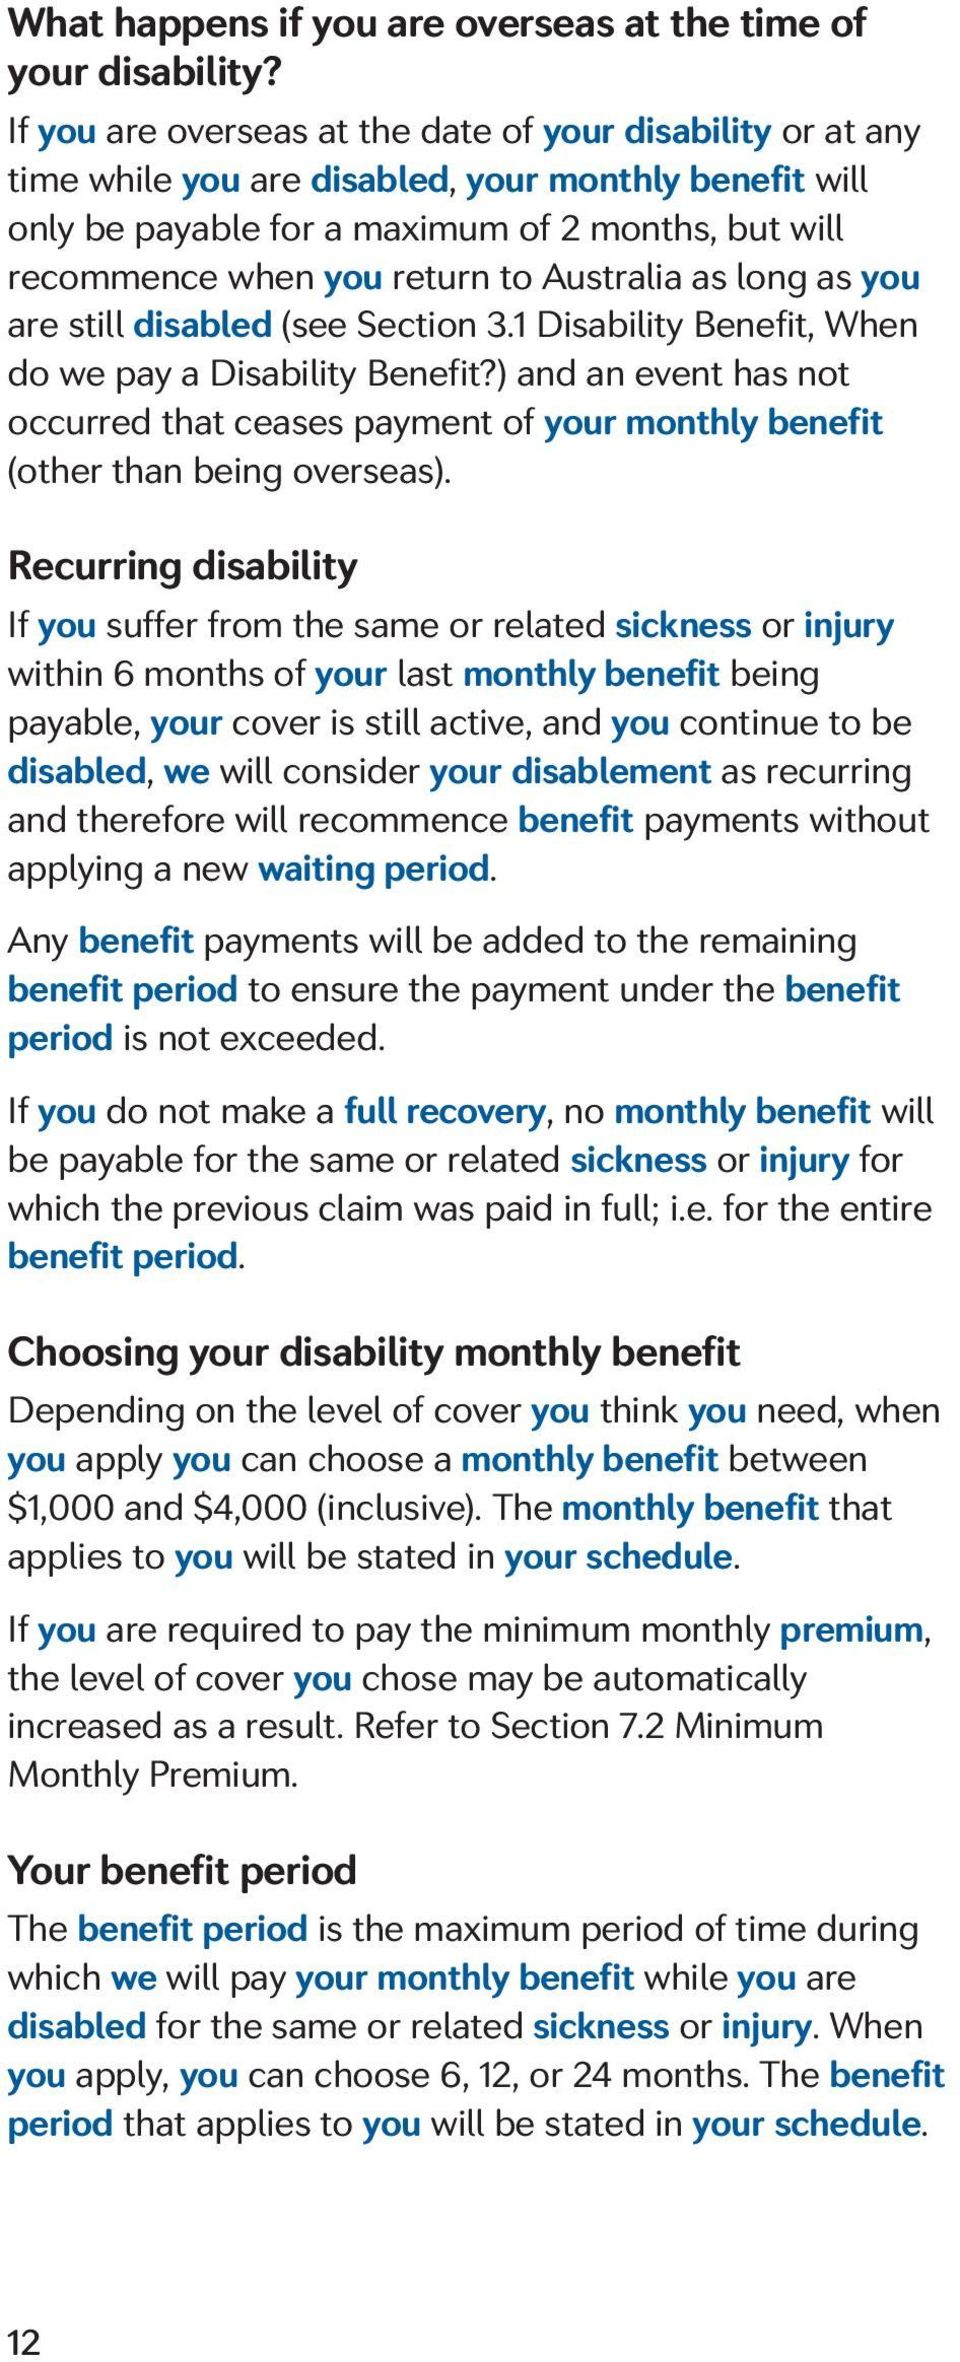 Australia as long as you are still disabled (see Section 3.1 Disability Benefit, When do we pay a Disability Benefit?